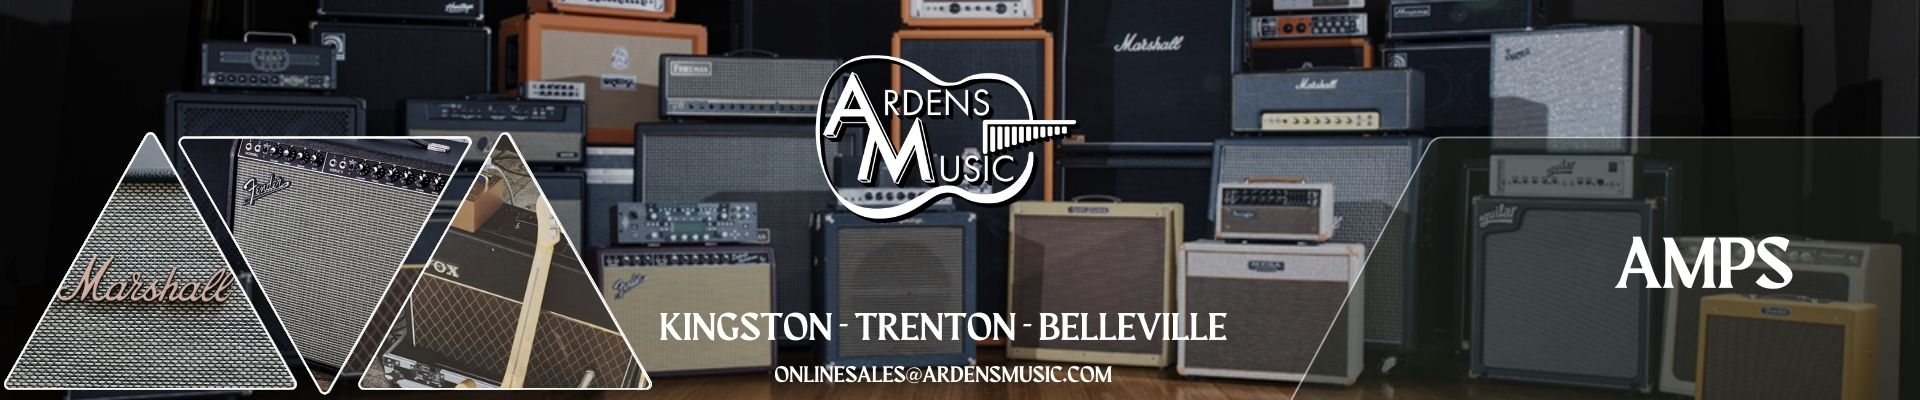 From Electric, to Acoustic & Bass amps, Arden's offers a wide range of Guitar amplification options from brands like Fender, Fishman, Marshall & more!